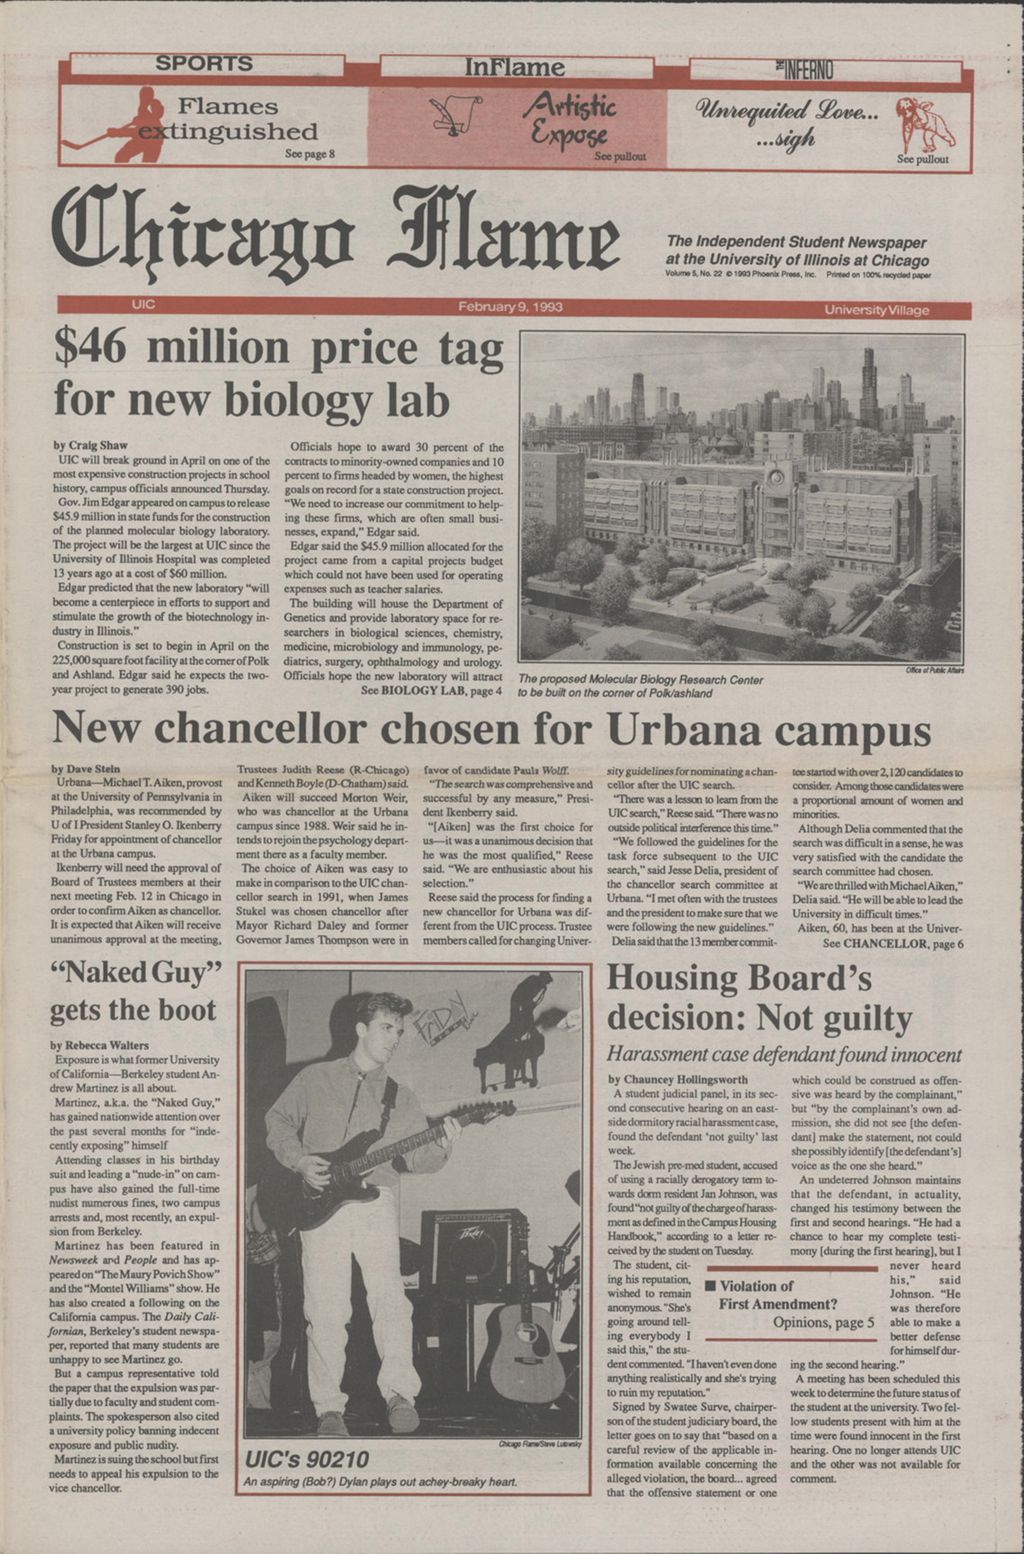 Miniature of Chicago Flame (February 9, 1993)